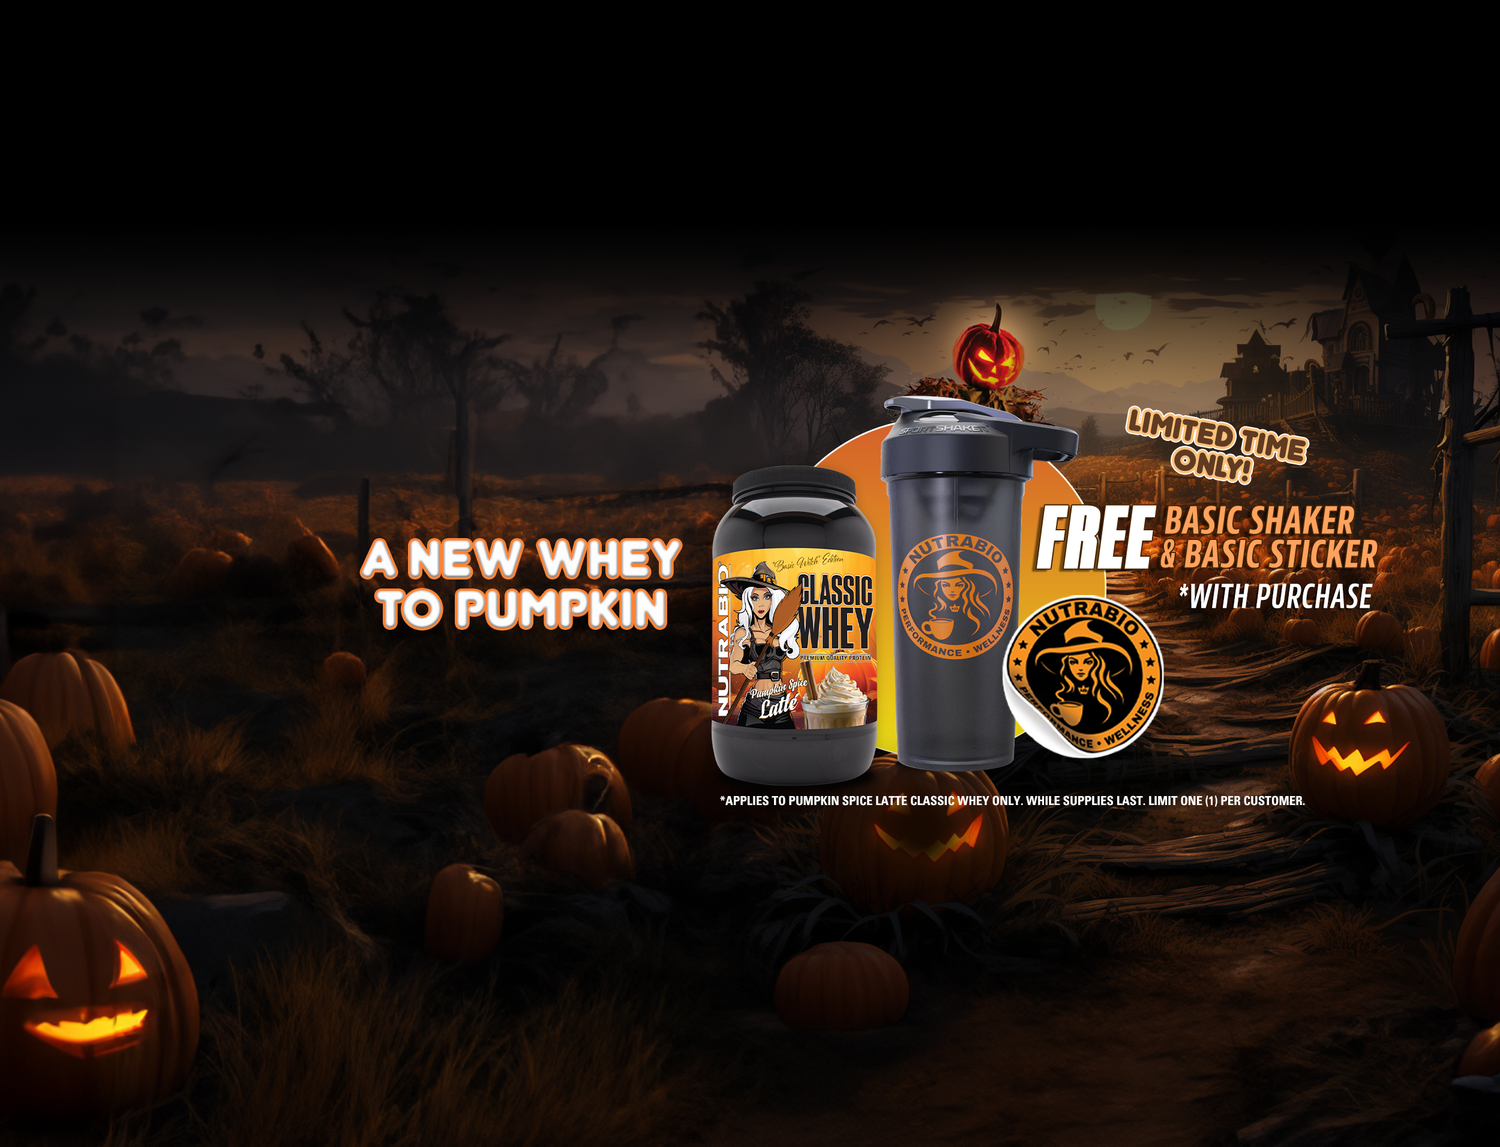 Pumpkin Spice Latte Protein Promotion: FREE Shaker And Free Sticker With Purchase Of 2lb Pumpkin Spice Latte